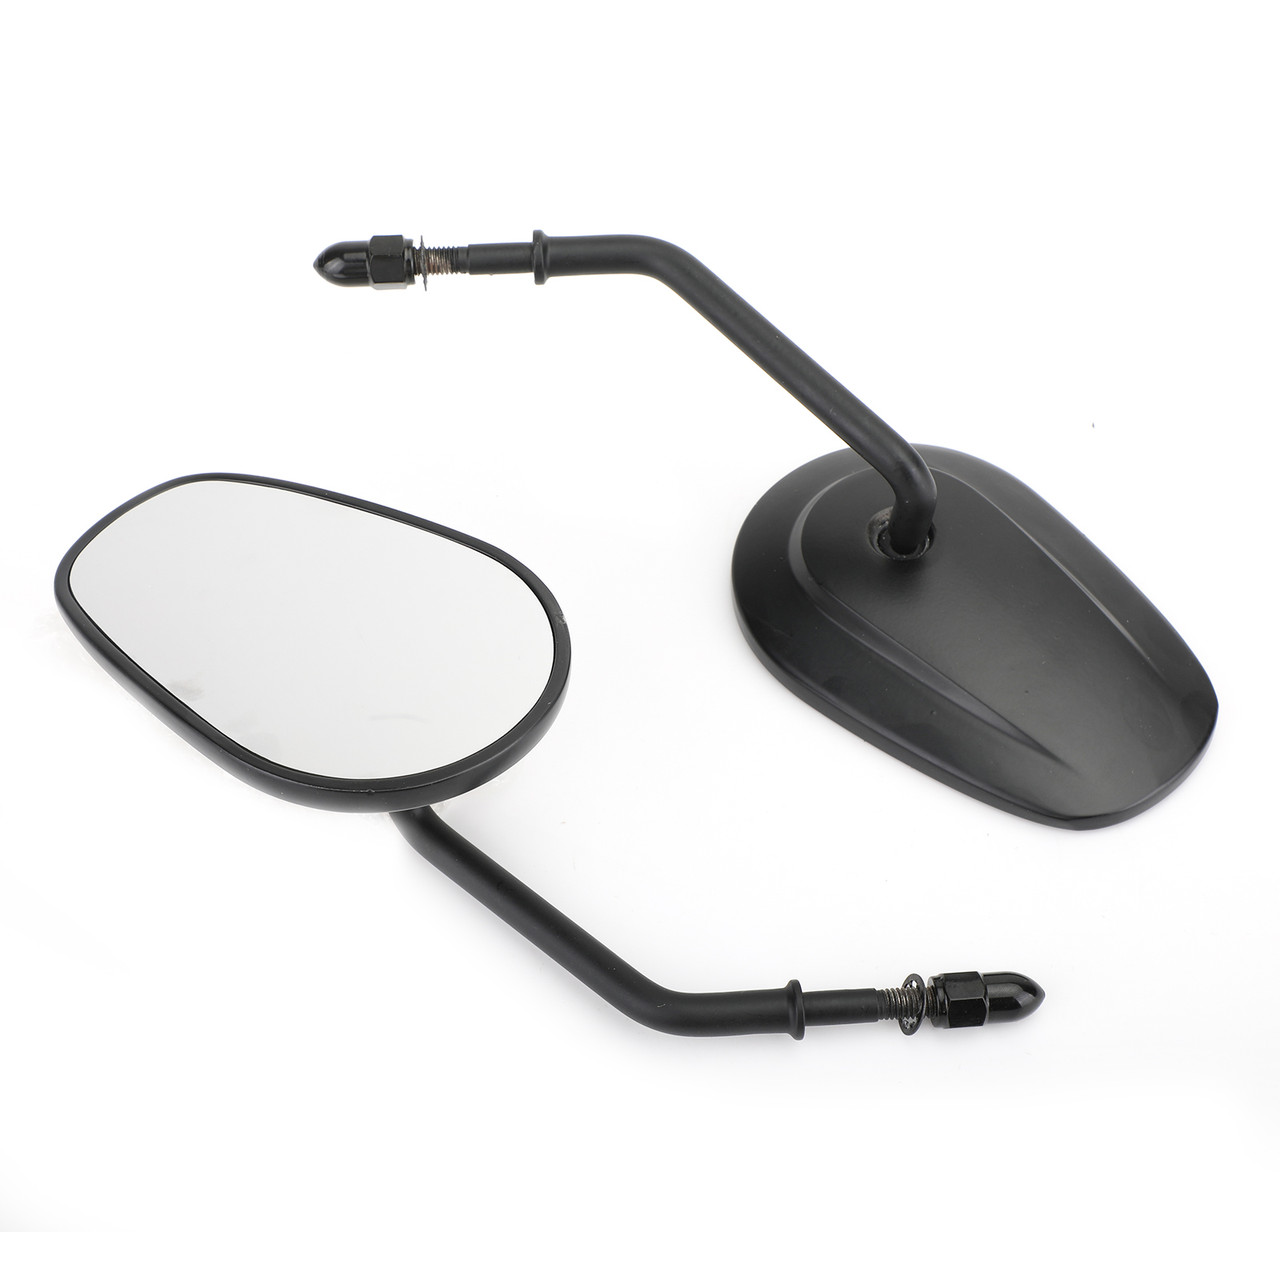 1 Pair Mirrors(Left & Right) Fit For HARLEY Switchback FLD 2012-2016 Wide Glide FXDWG Roadster XL1200CX 2016 Road King FLHR 1994-2016 Black